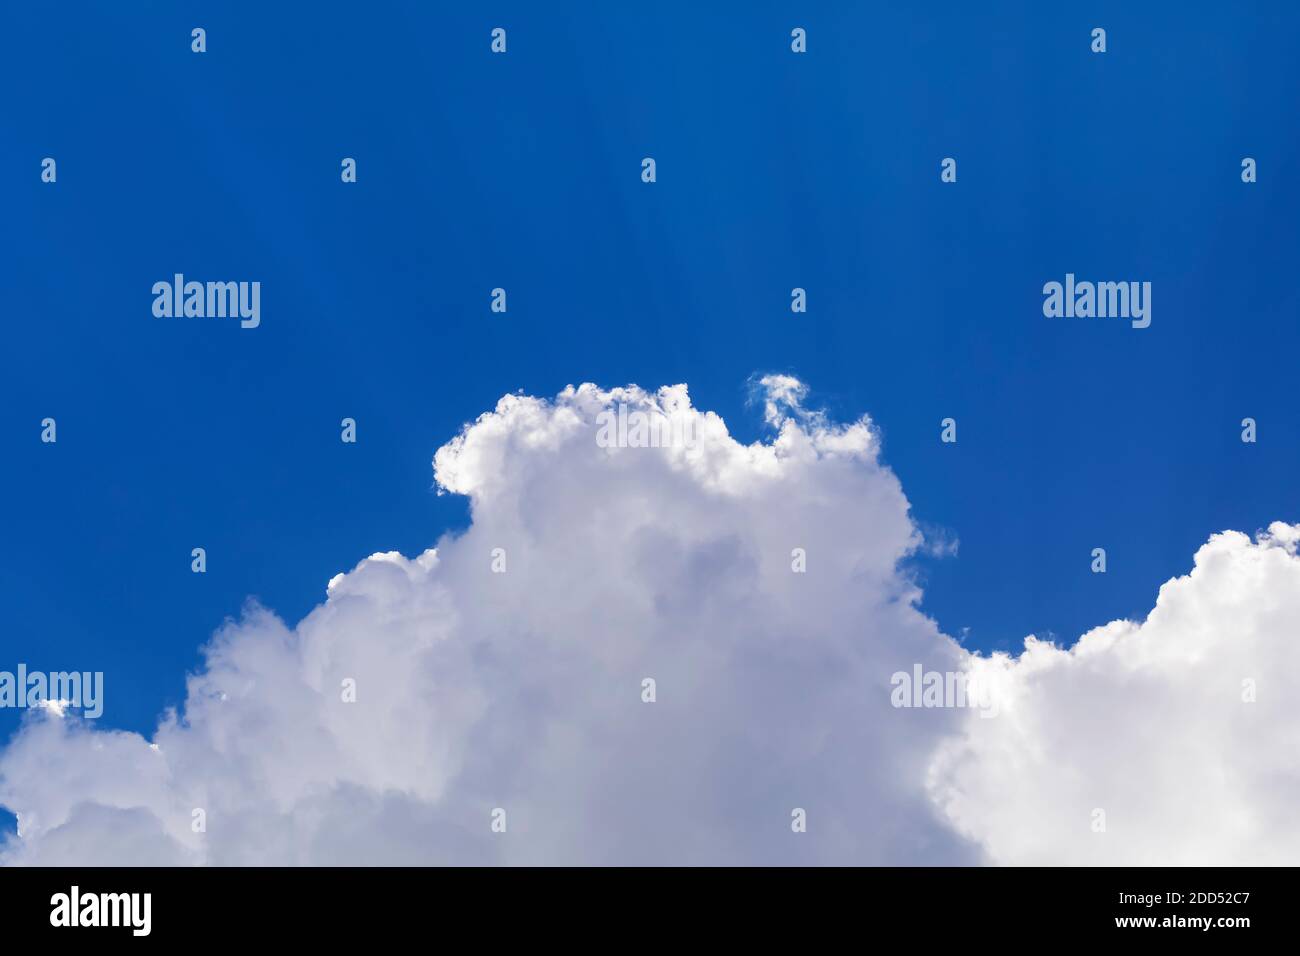 Dramatic white clouds float in the blue sky. Stock Photo